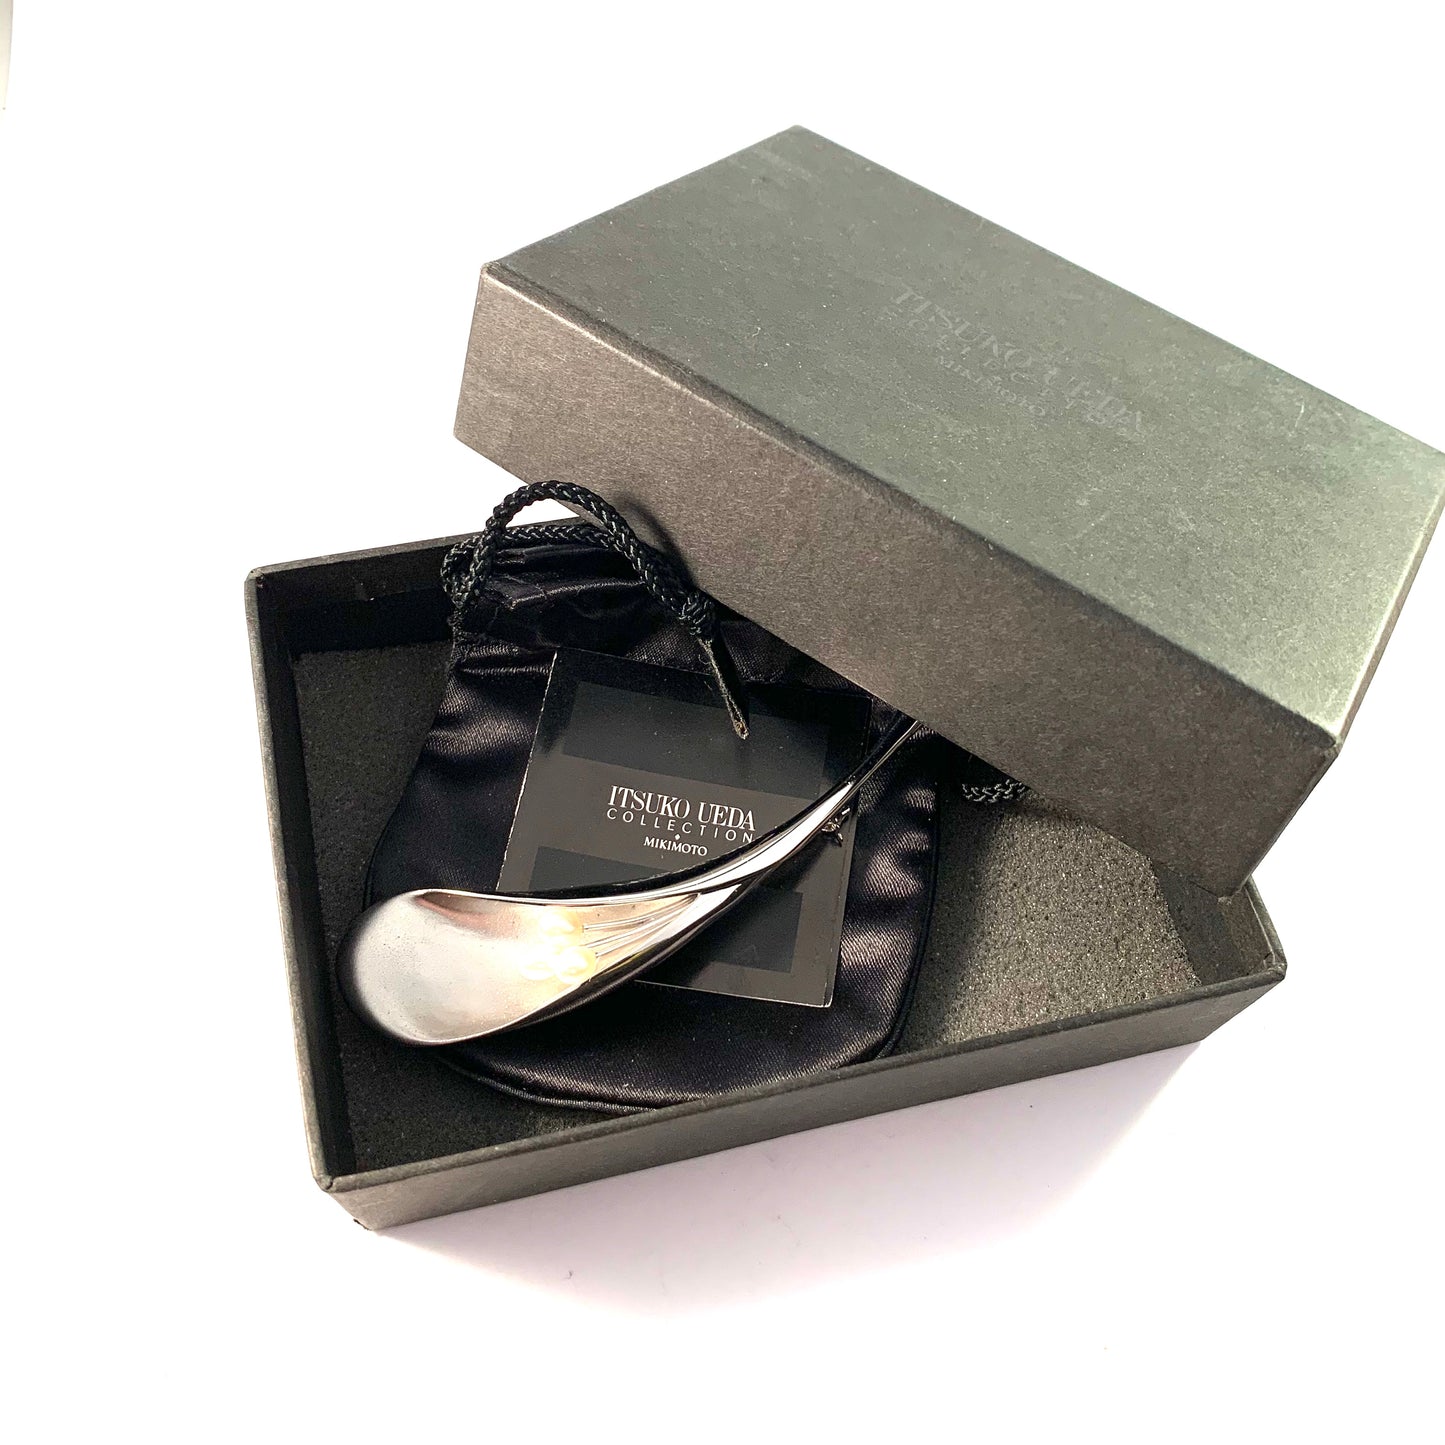 Mikimoto, Japan Sterling Silver Cultured Pearl Large Brooch. Boxed.